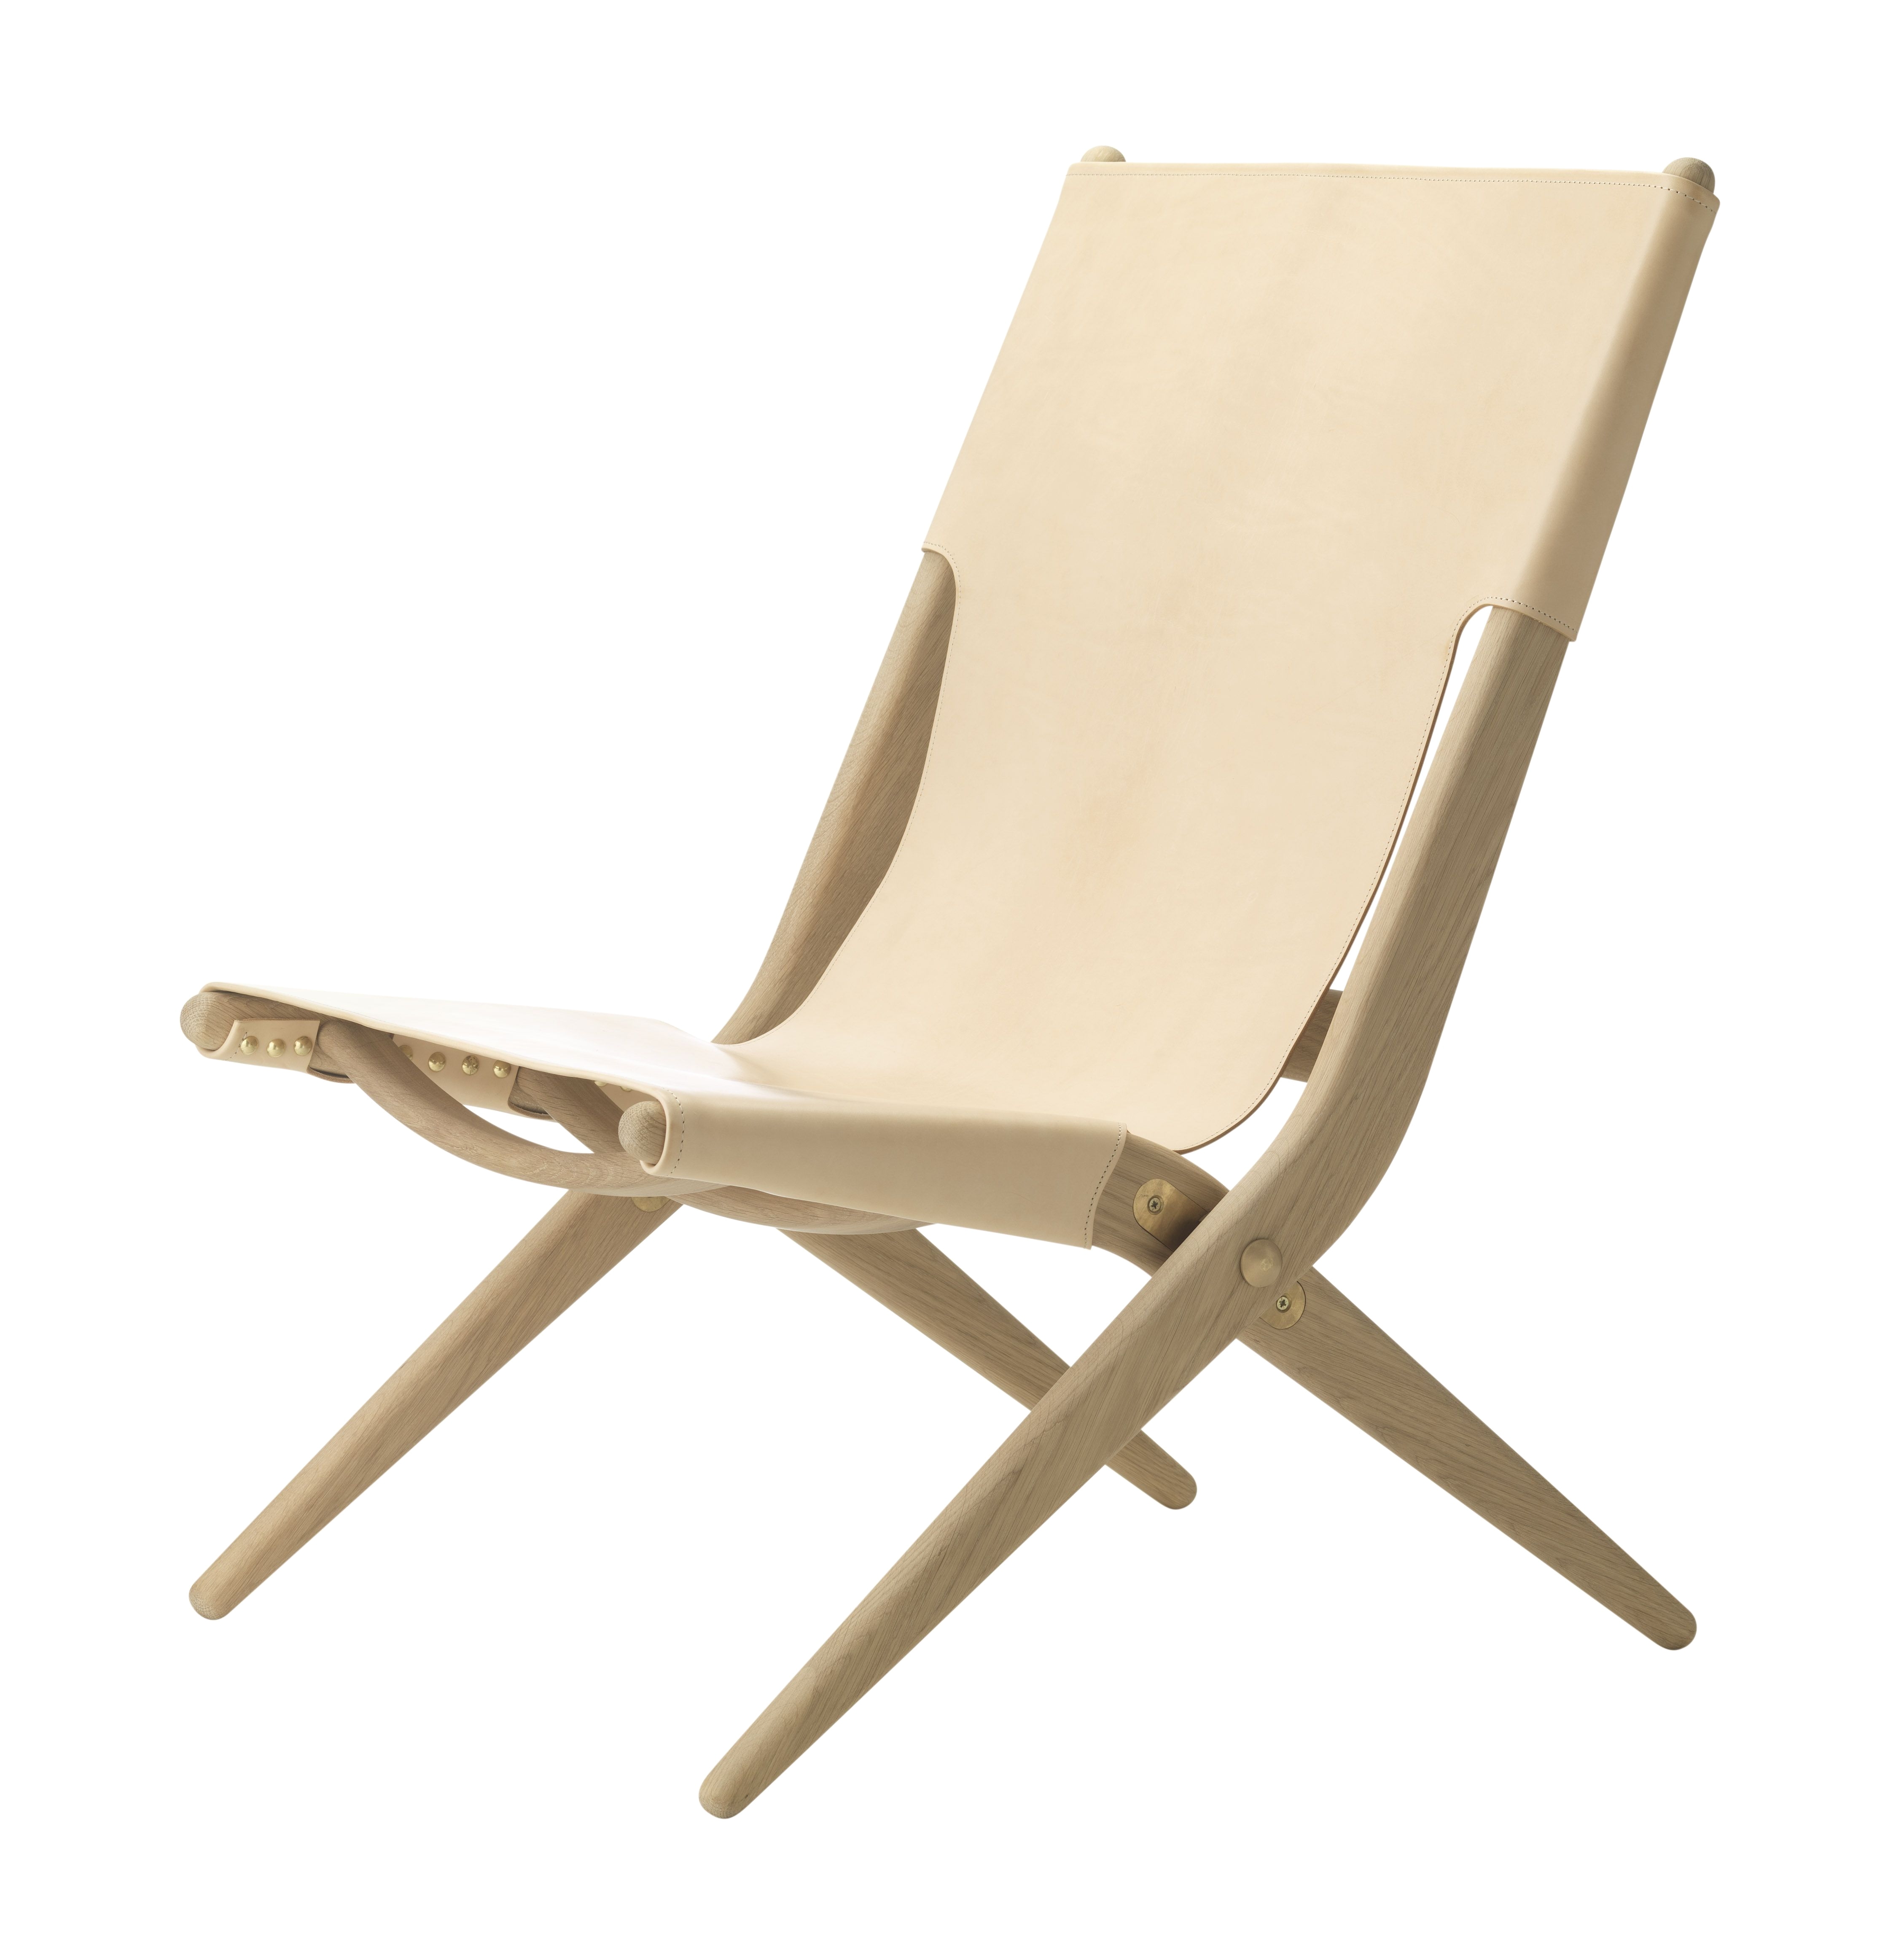 saxe is a characterful and timeless folding chair designed in 1955 by the visionary designer and architect mogens lassen for the copenhagen cabinetmakers